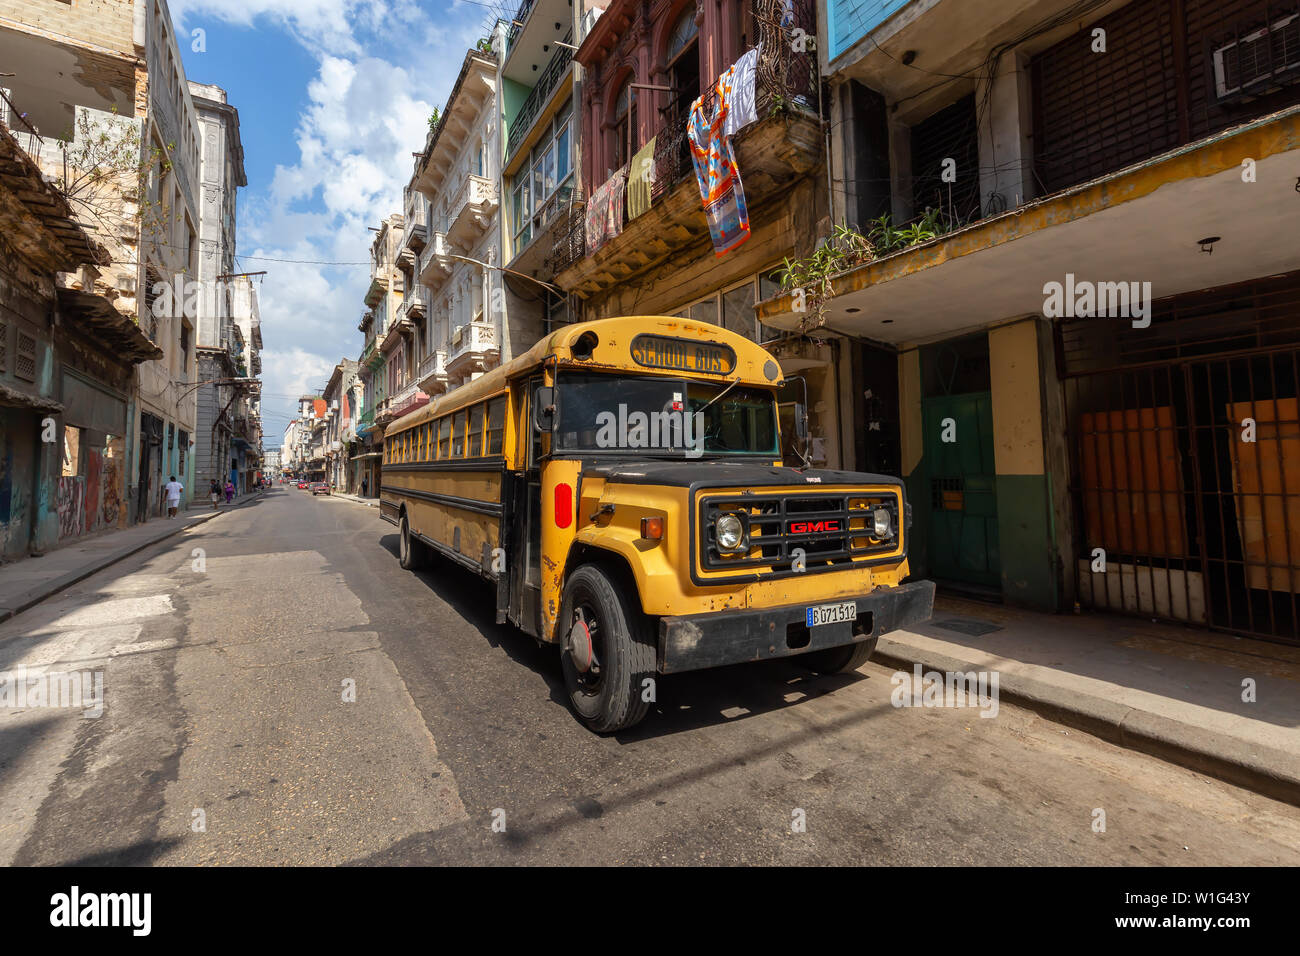 Havana, Cuba - May 14, 2019: Yellow School Bus in the streets of the Old Havana City, Capital of Cuba, during a bright and sunny day. Stock Photo